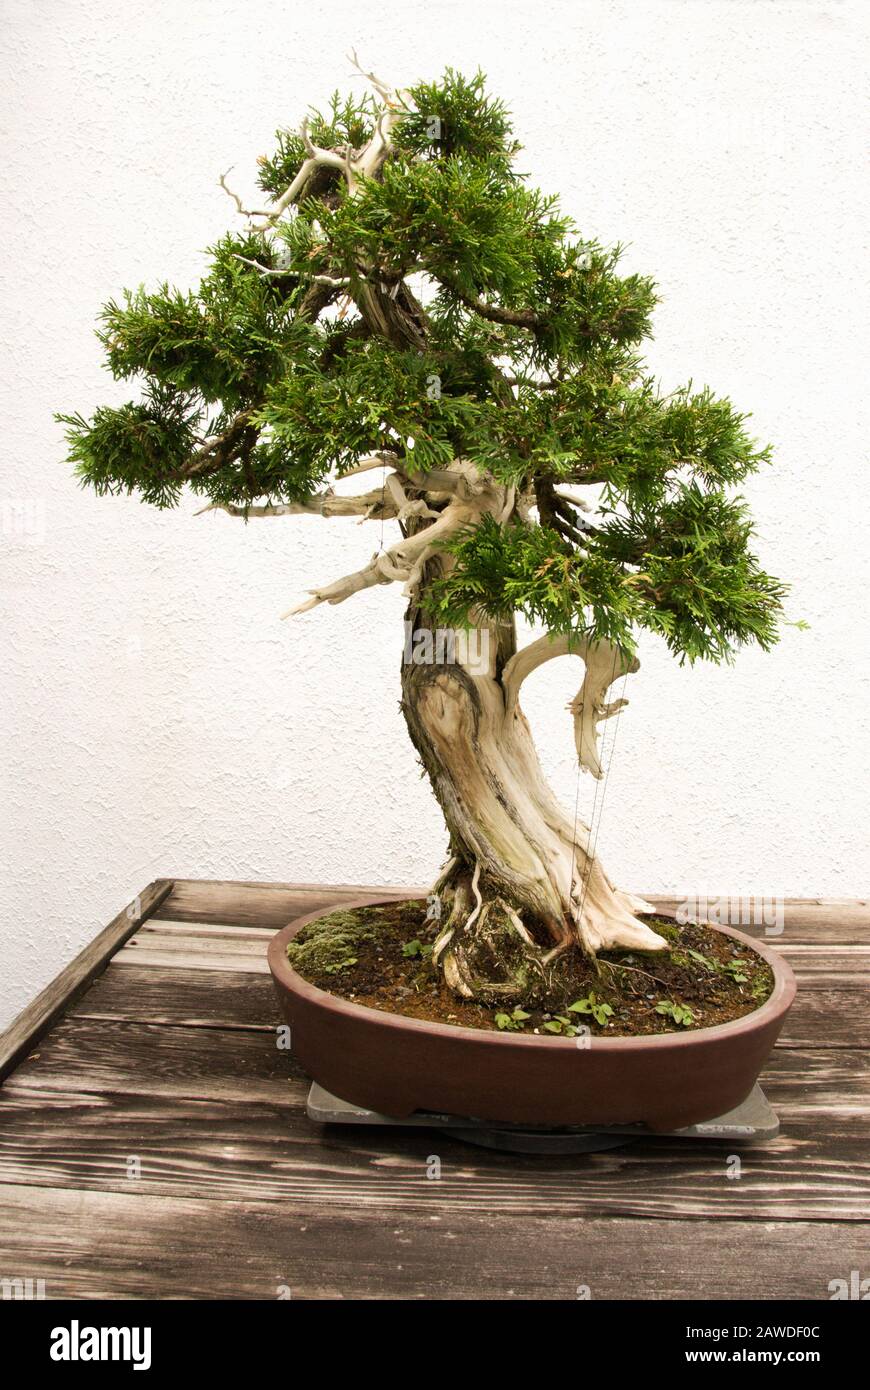 Miniature matured green colored cedar bonsai tree growing in a potted container. Stock Photo